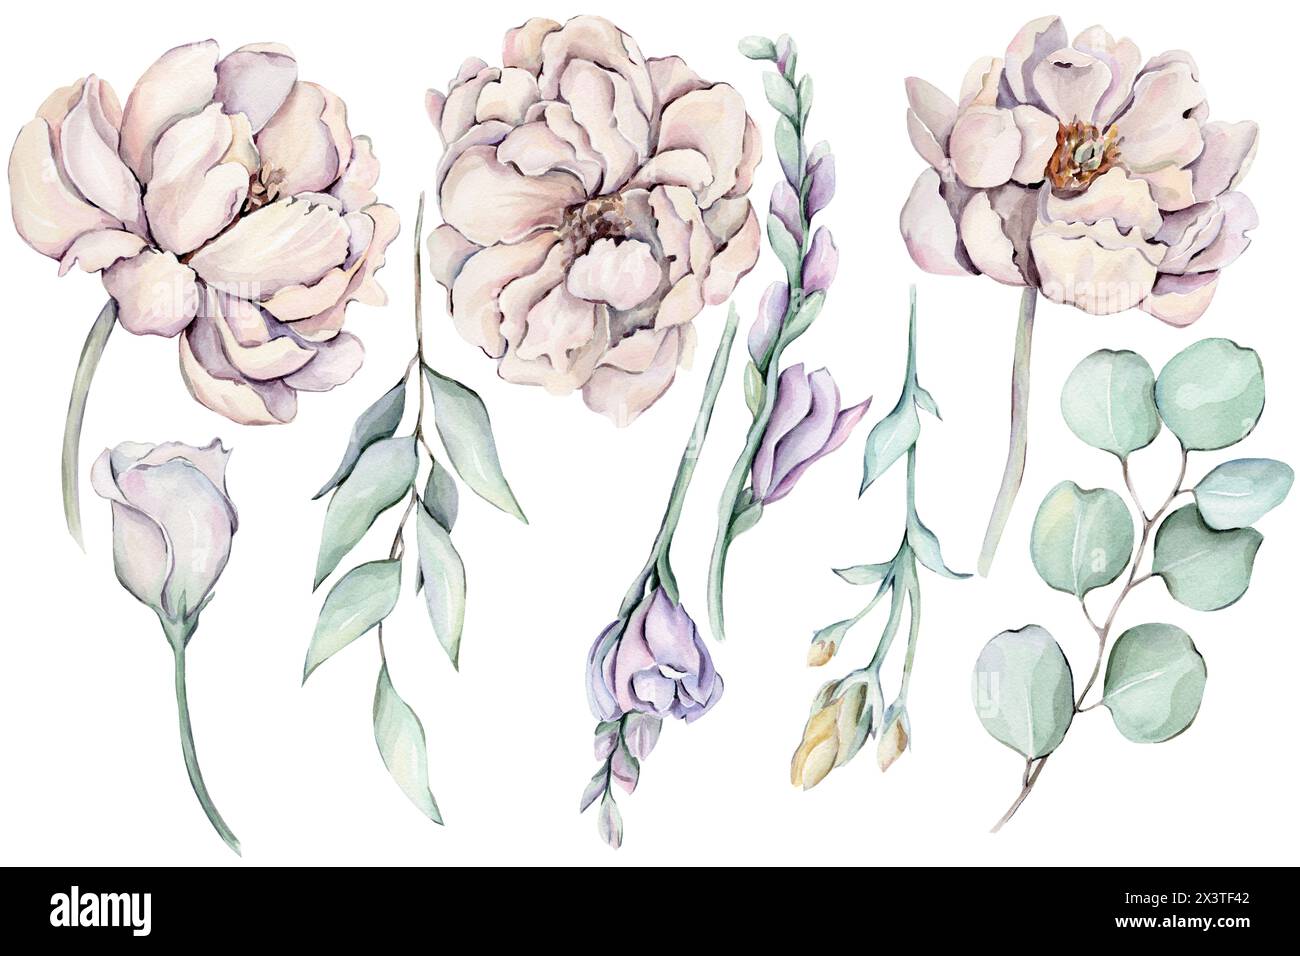 Watercolor peonies, flowers and leaves Stock Photo